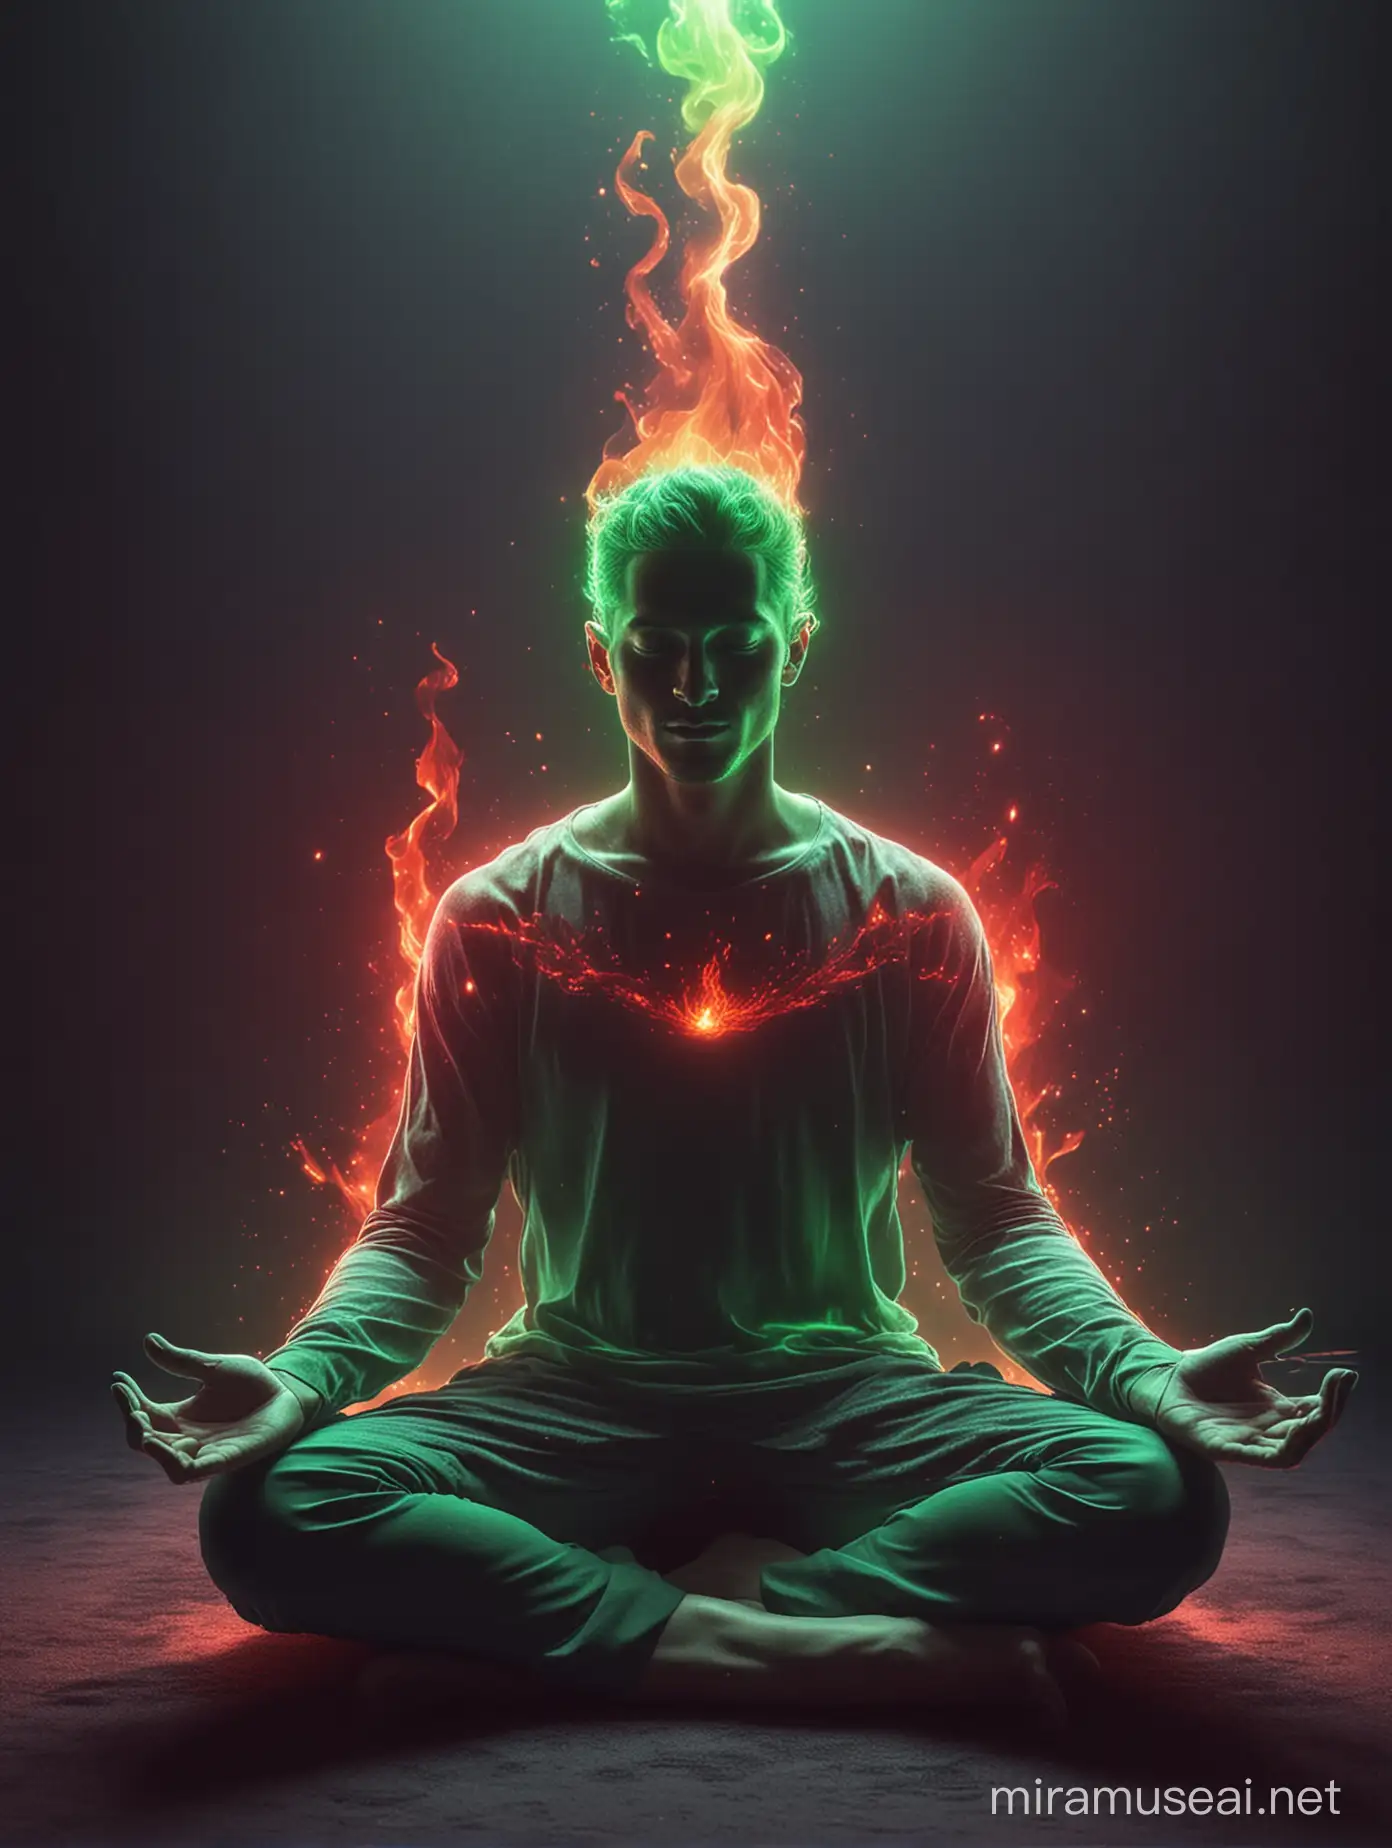 Meditating Holographic Man with Elemental Fire Hands in Vibrant 4K Gradient